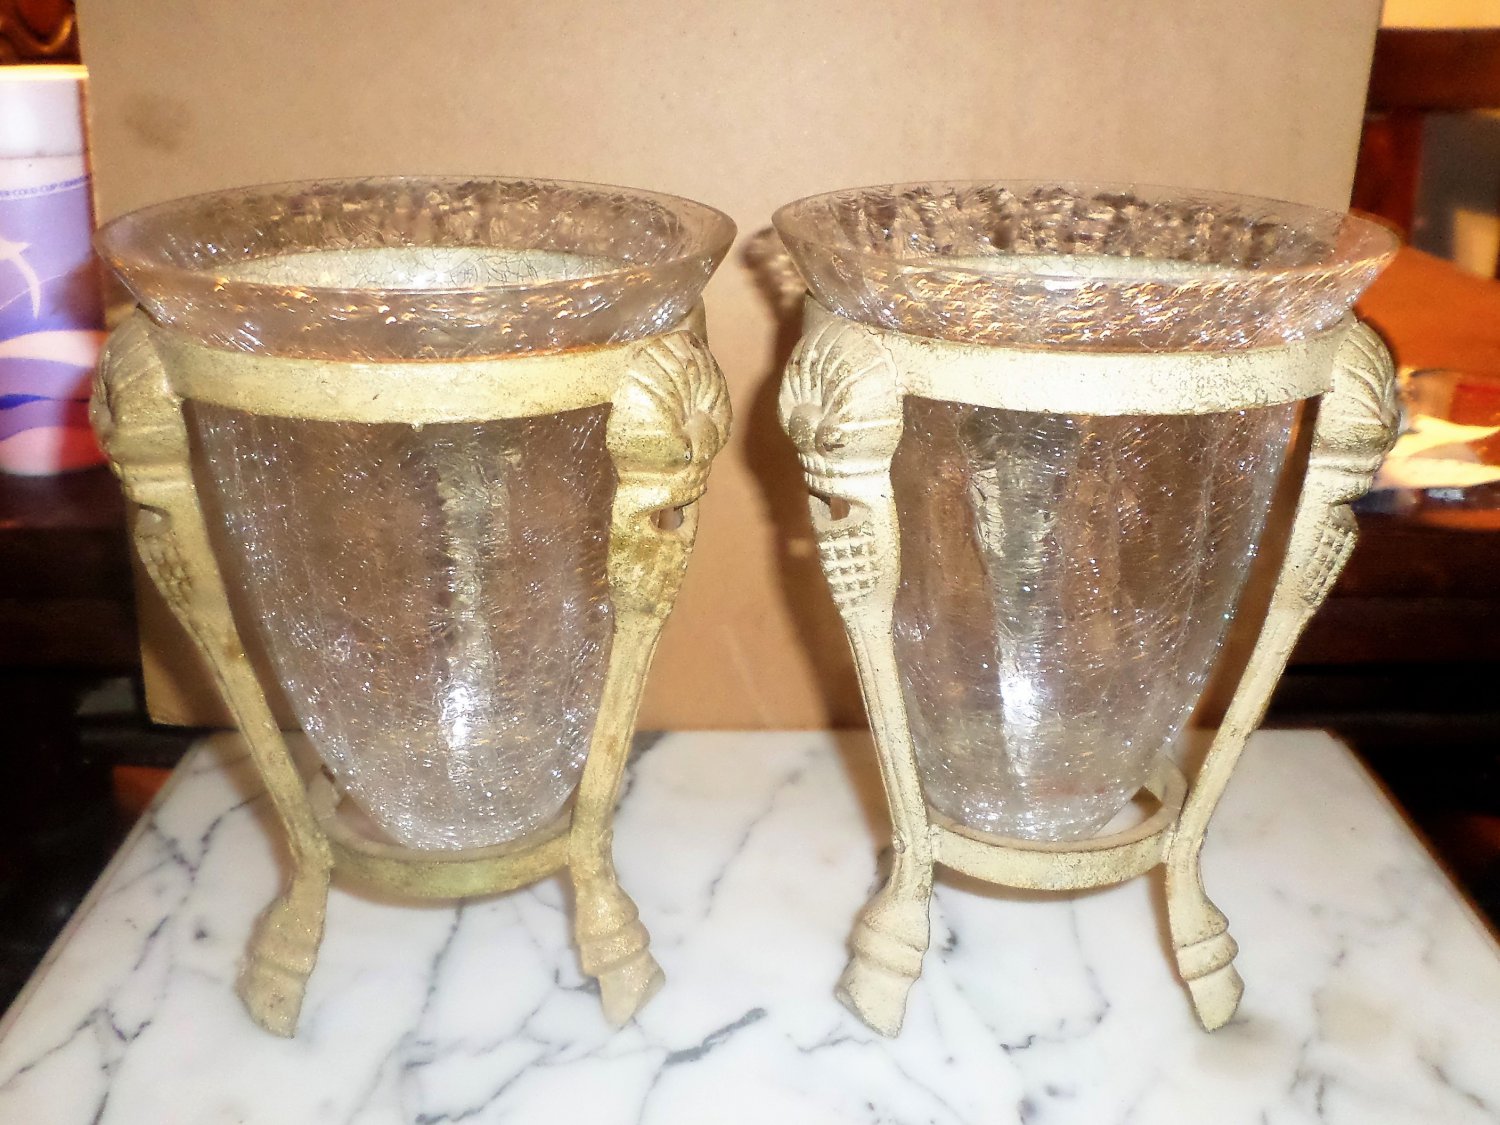 2 Shabby & Chic cast iron stands and Crackle glass candleholders/votives